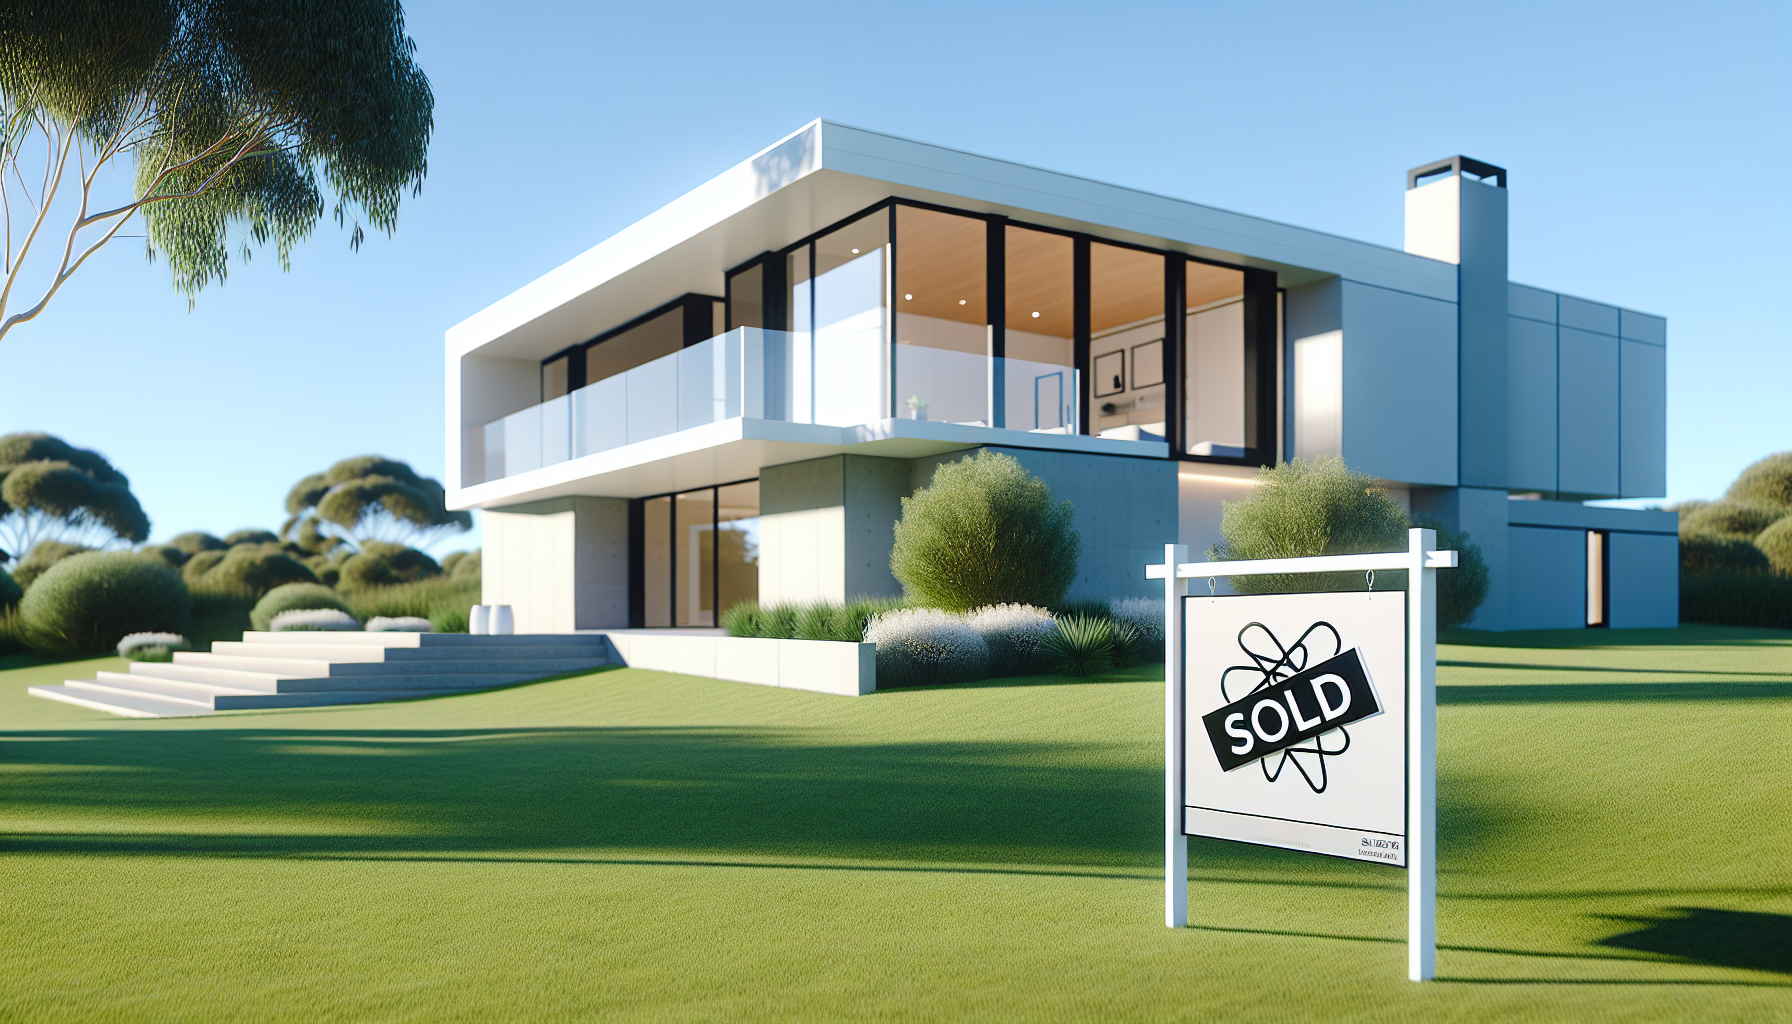 Illustration of a new home with a sold sign in front